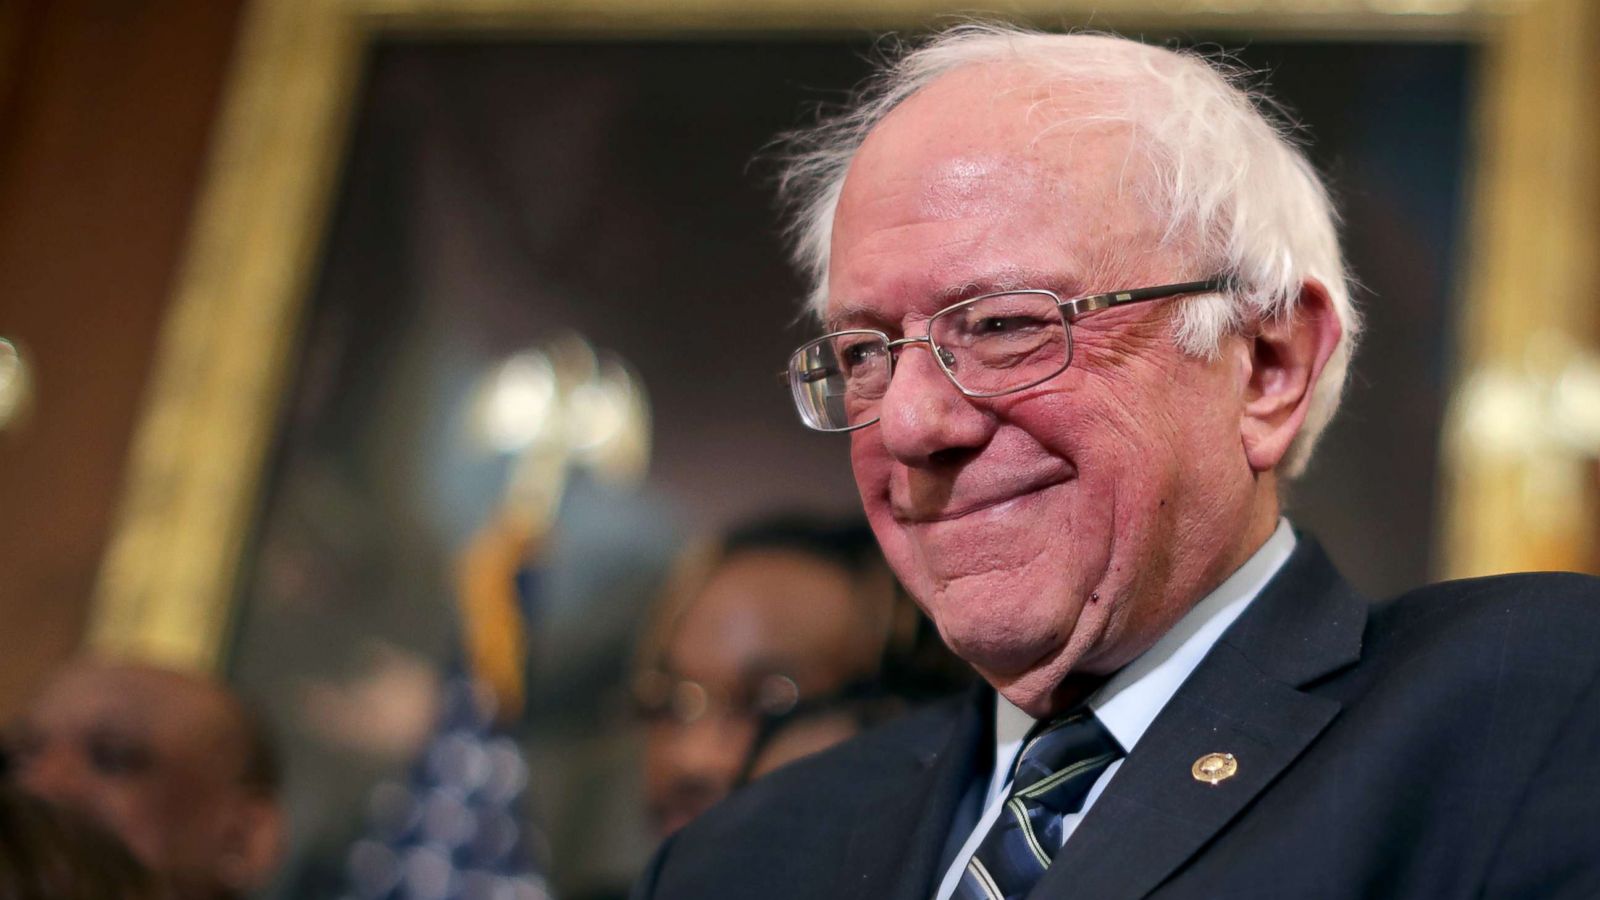 Bernie Sanders: Everything you need to know about about the 2020 presidential candidate - ABC News